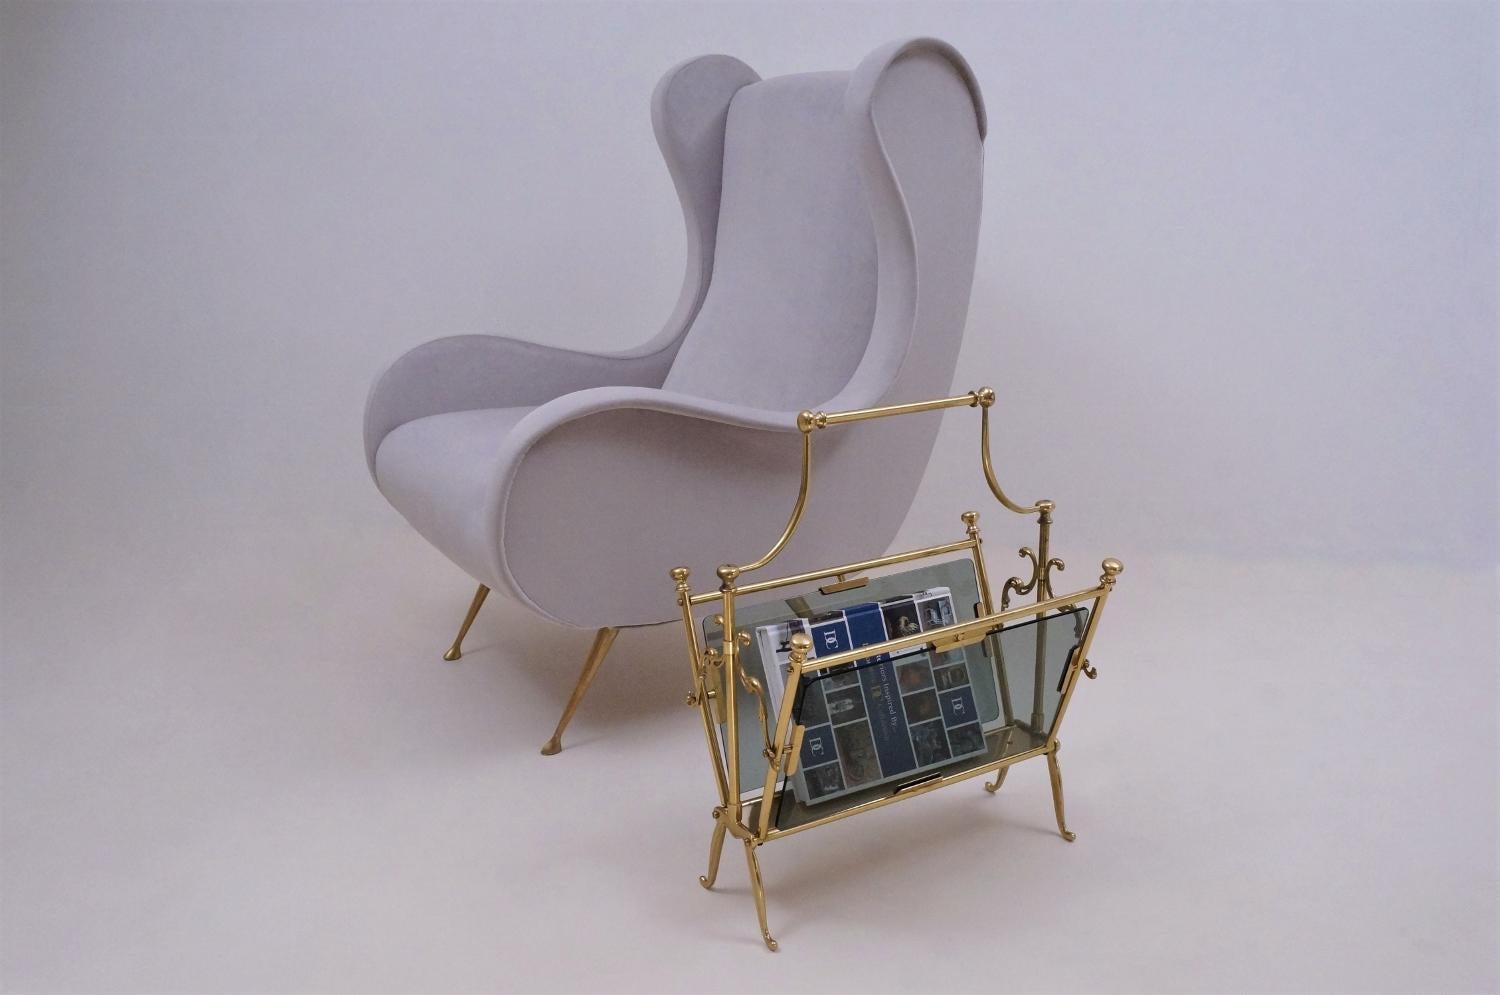 Vintage brass magazine rack with smoked glass sides, Maison Baguès, circa 1960s, French.

This item has been gently cleaned while respecting the vintage patina and is ready to use.

With its scrolling patterns and Modernist smoked glass, this